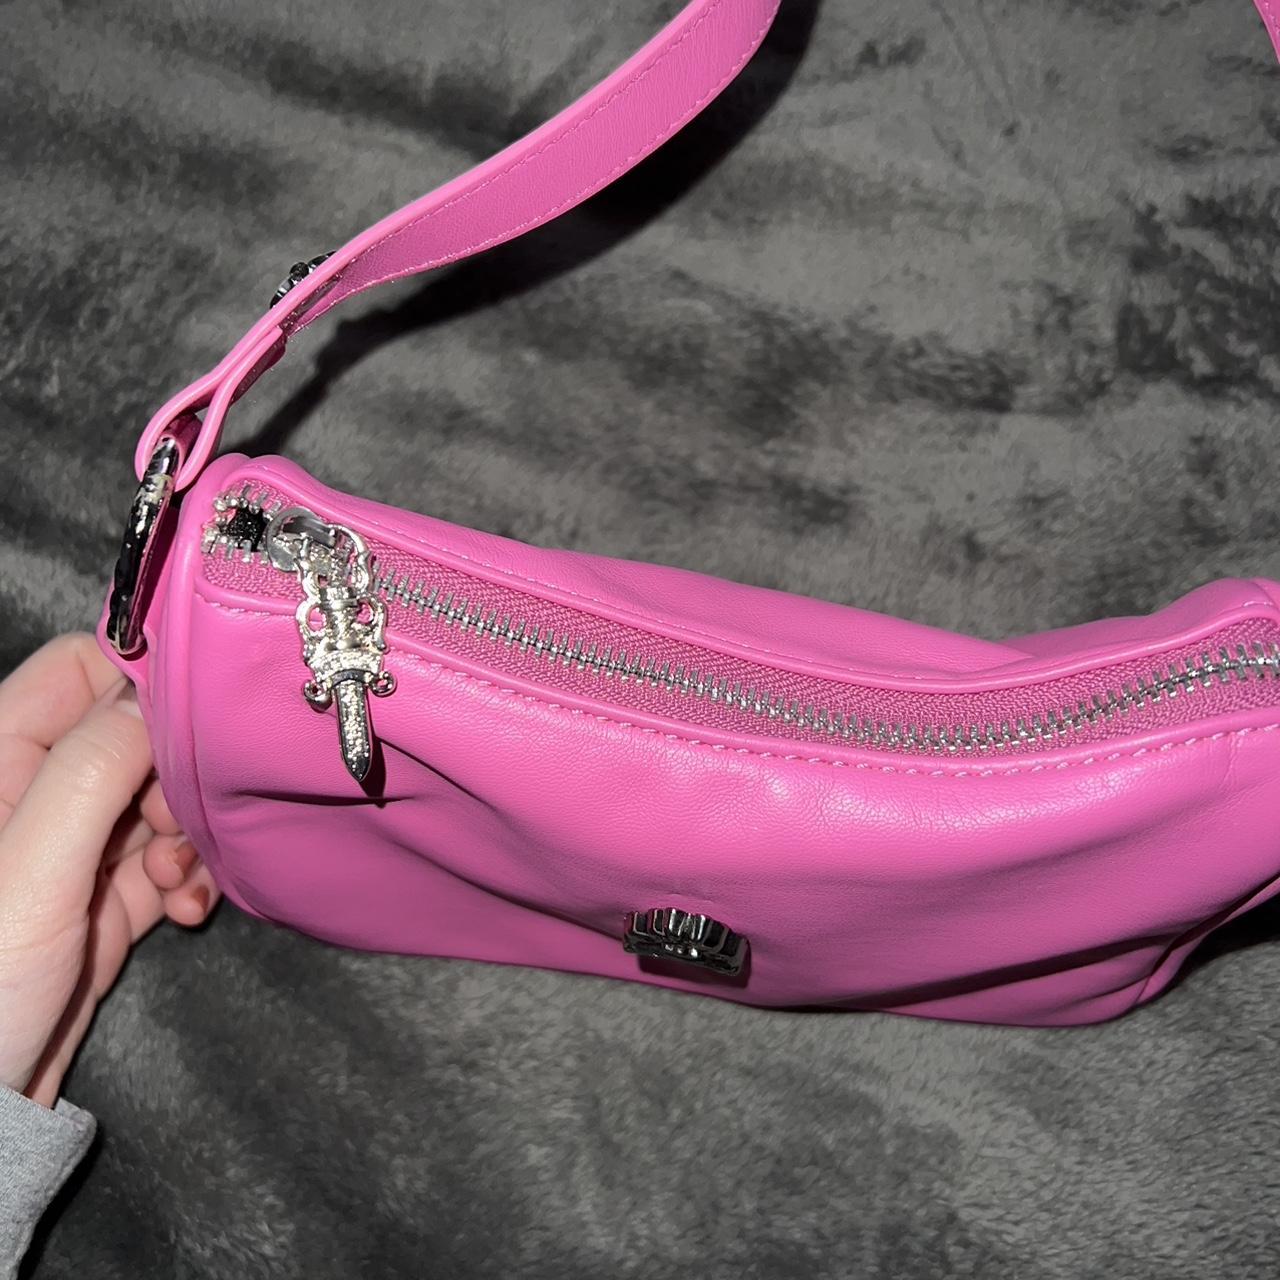 Women's Pink and Silver Bag (3)